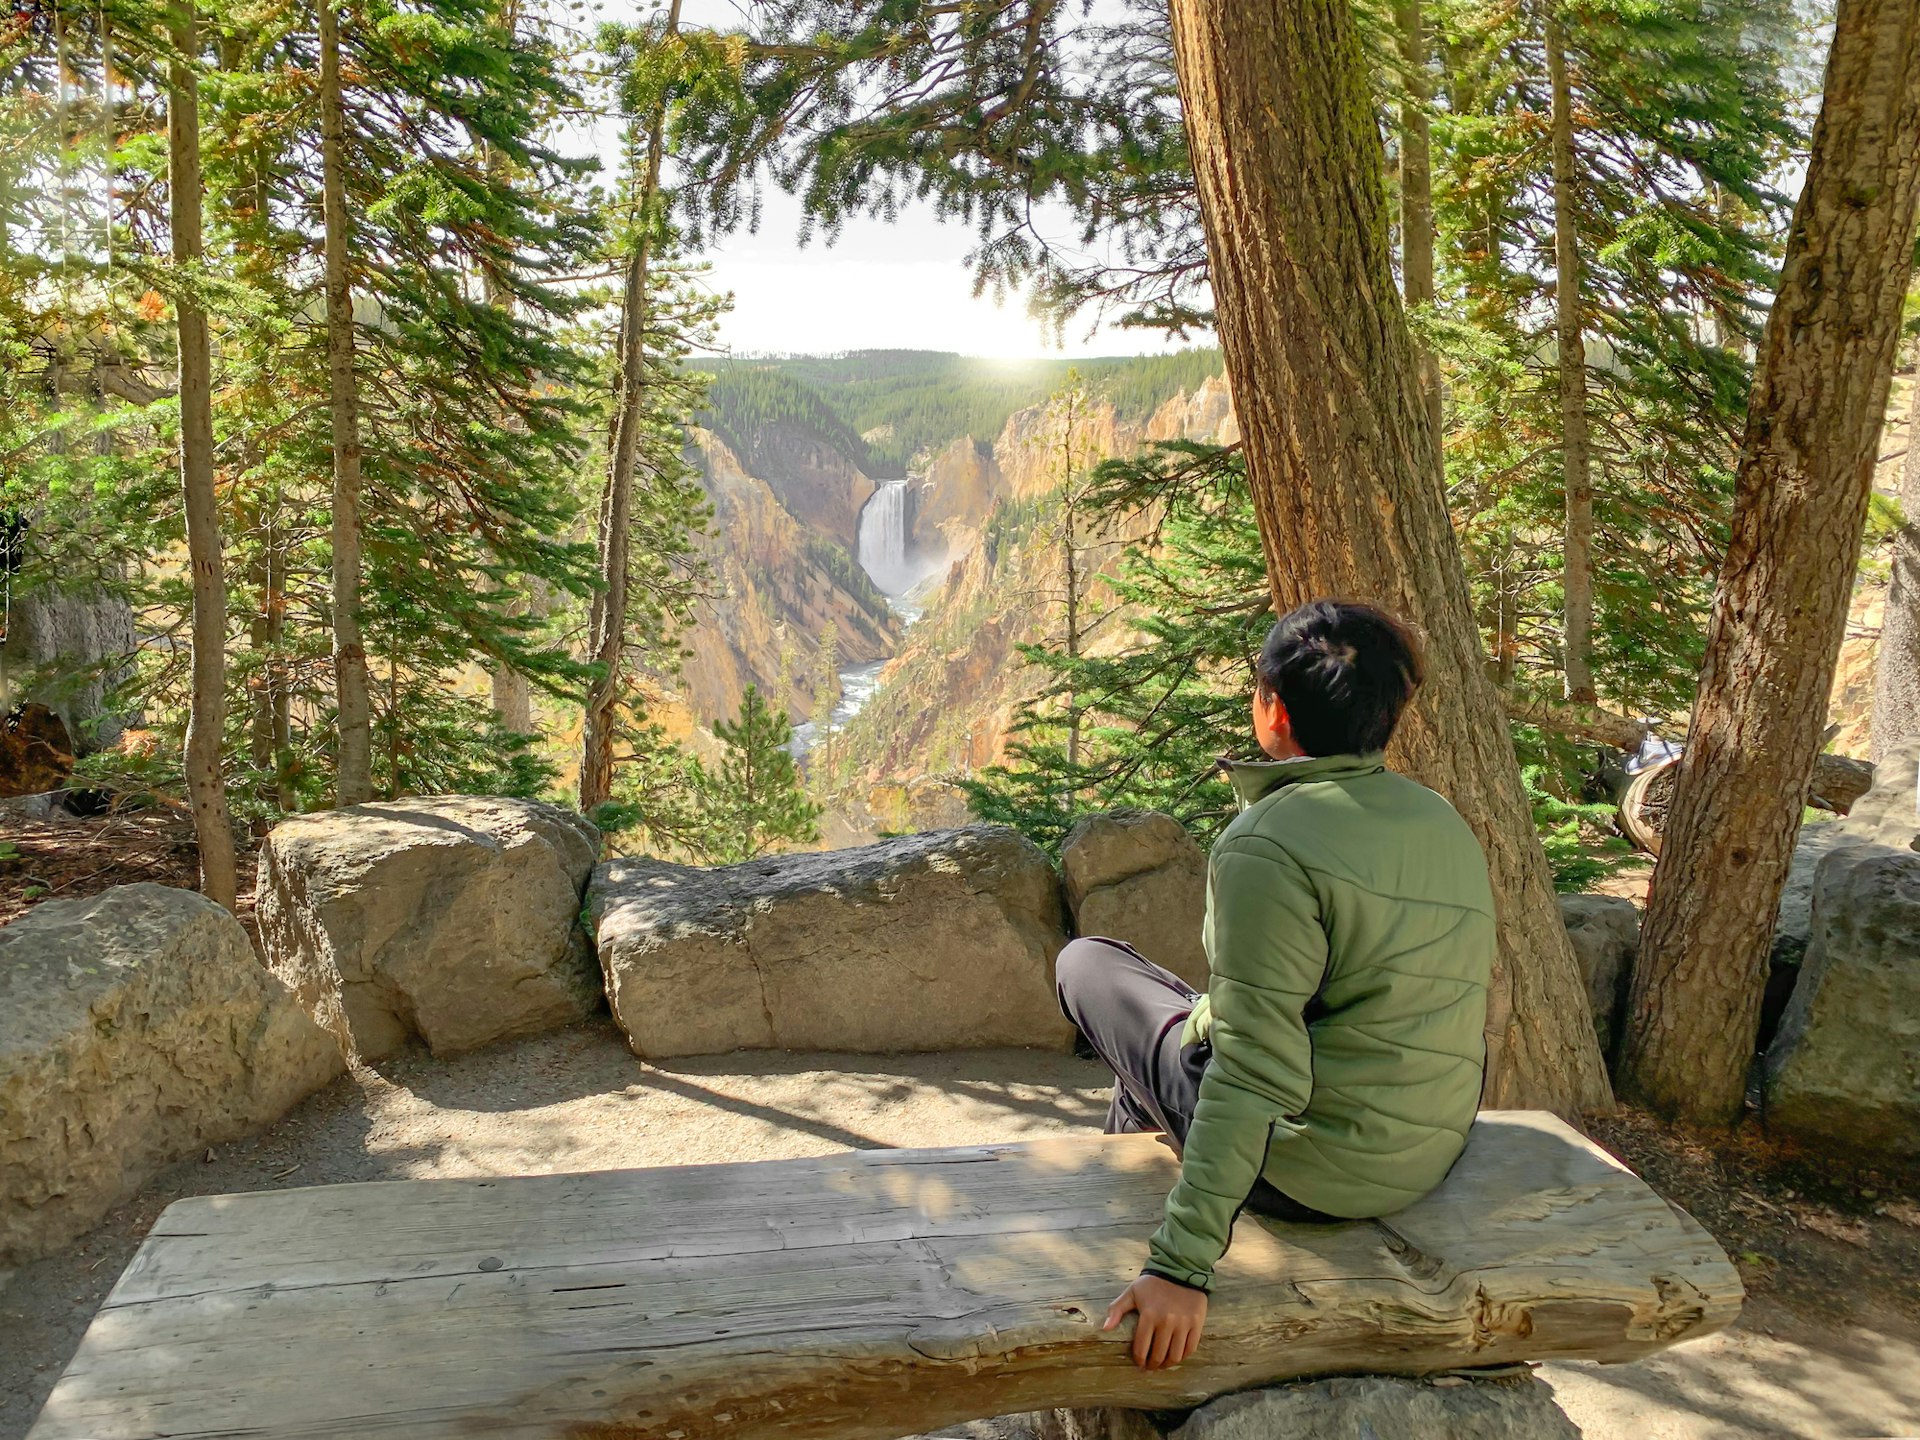 A man sits on a bench at a viewpoint and gazes towards a waterfall in the distance